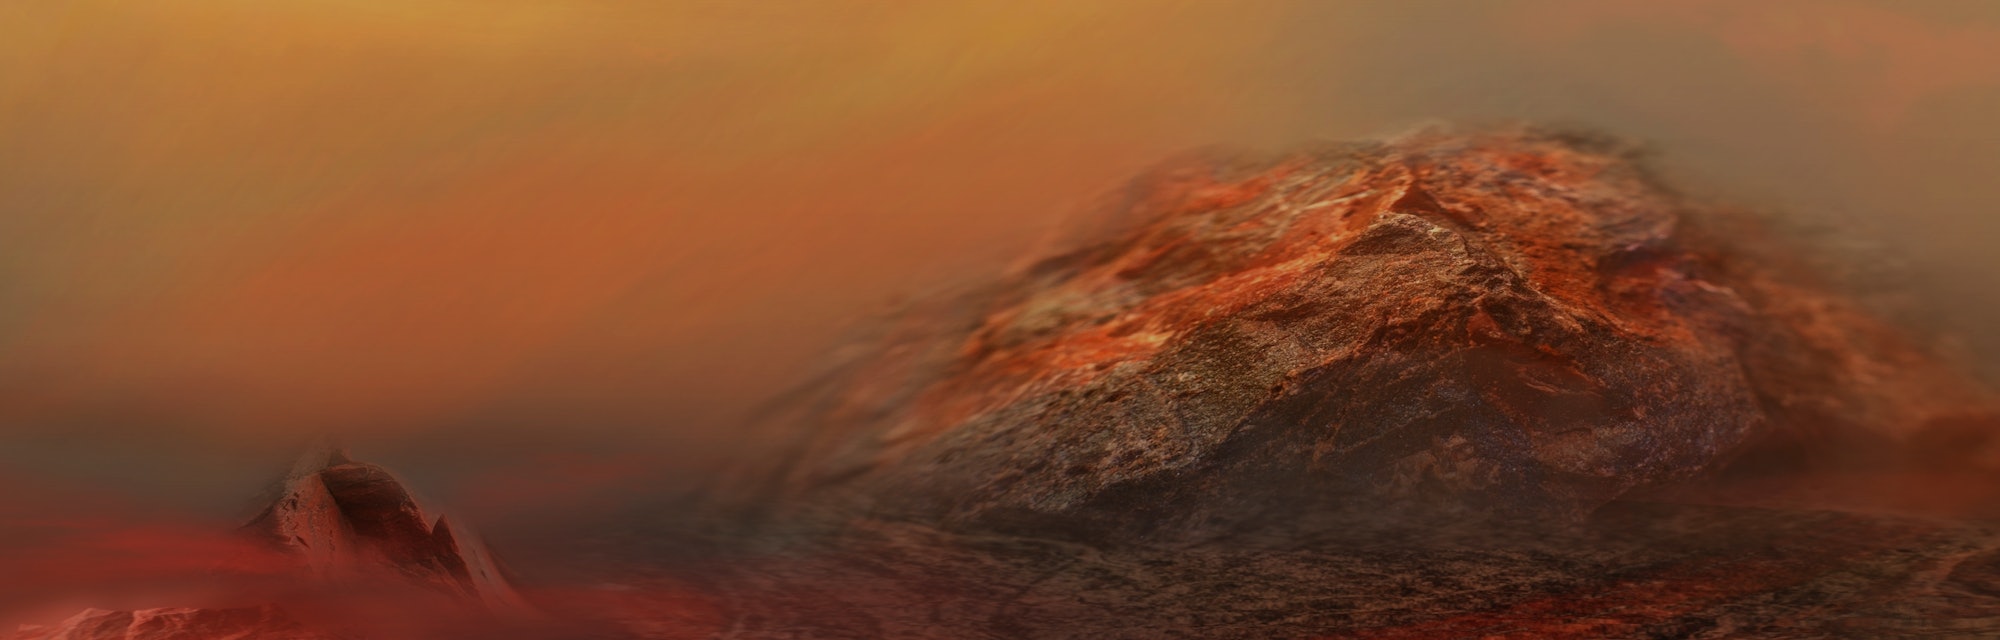 Dramatic nature background of Volcanic breed of Planet Hell, Mars rocky surface. 